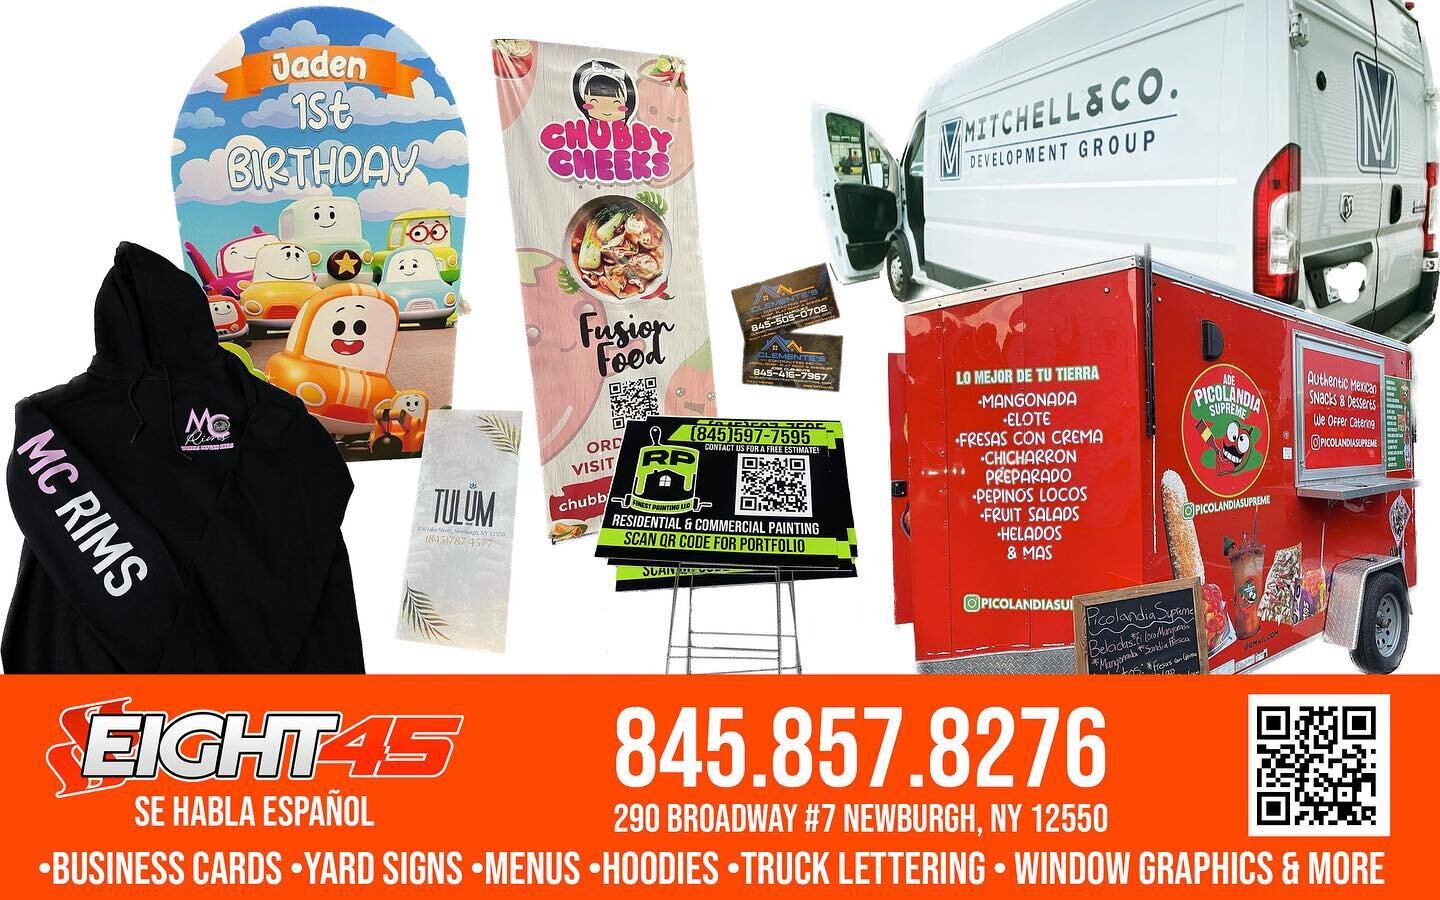 For all your printing needs! Contact us for your future projects and let us make it an easy process for you! We are always here to help our customers and give them what they deserve to grow their brands!